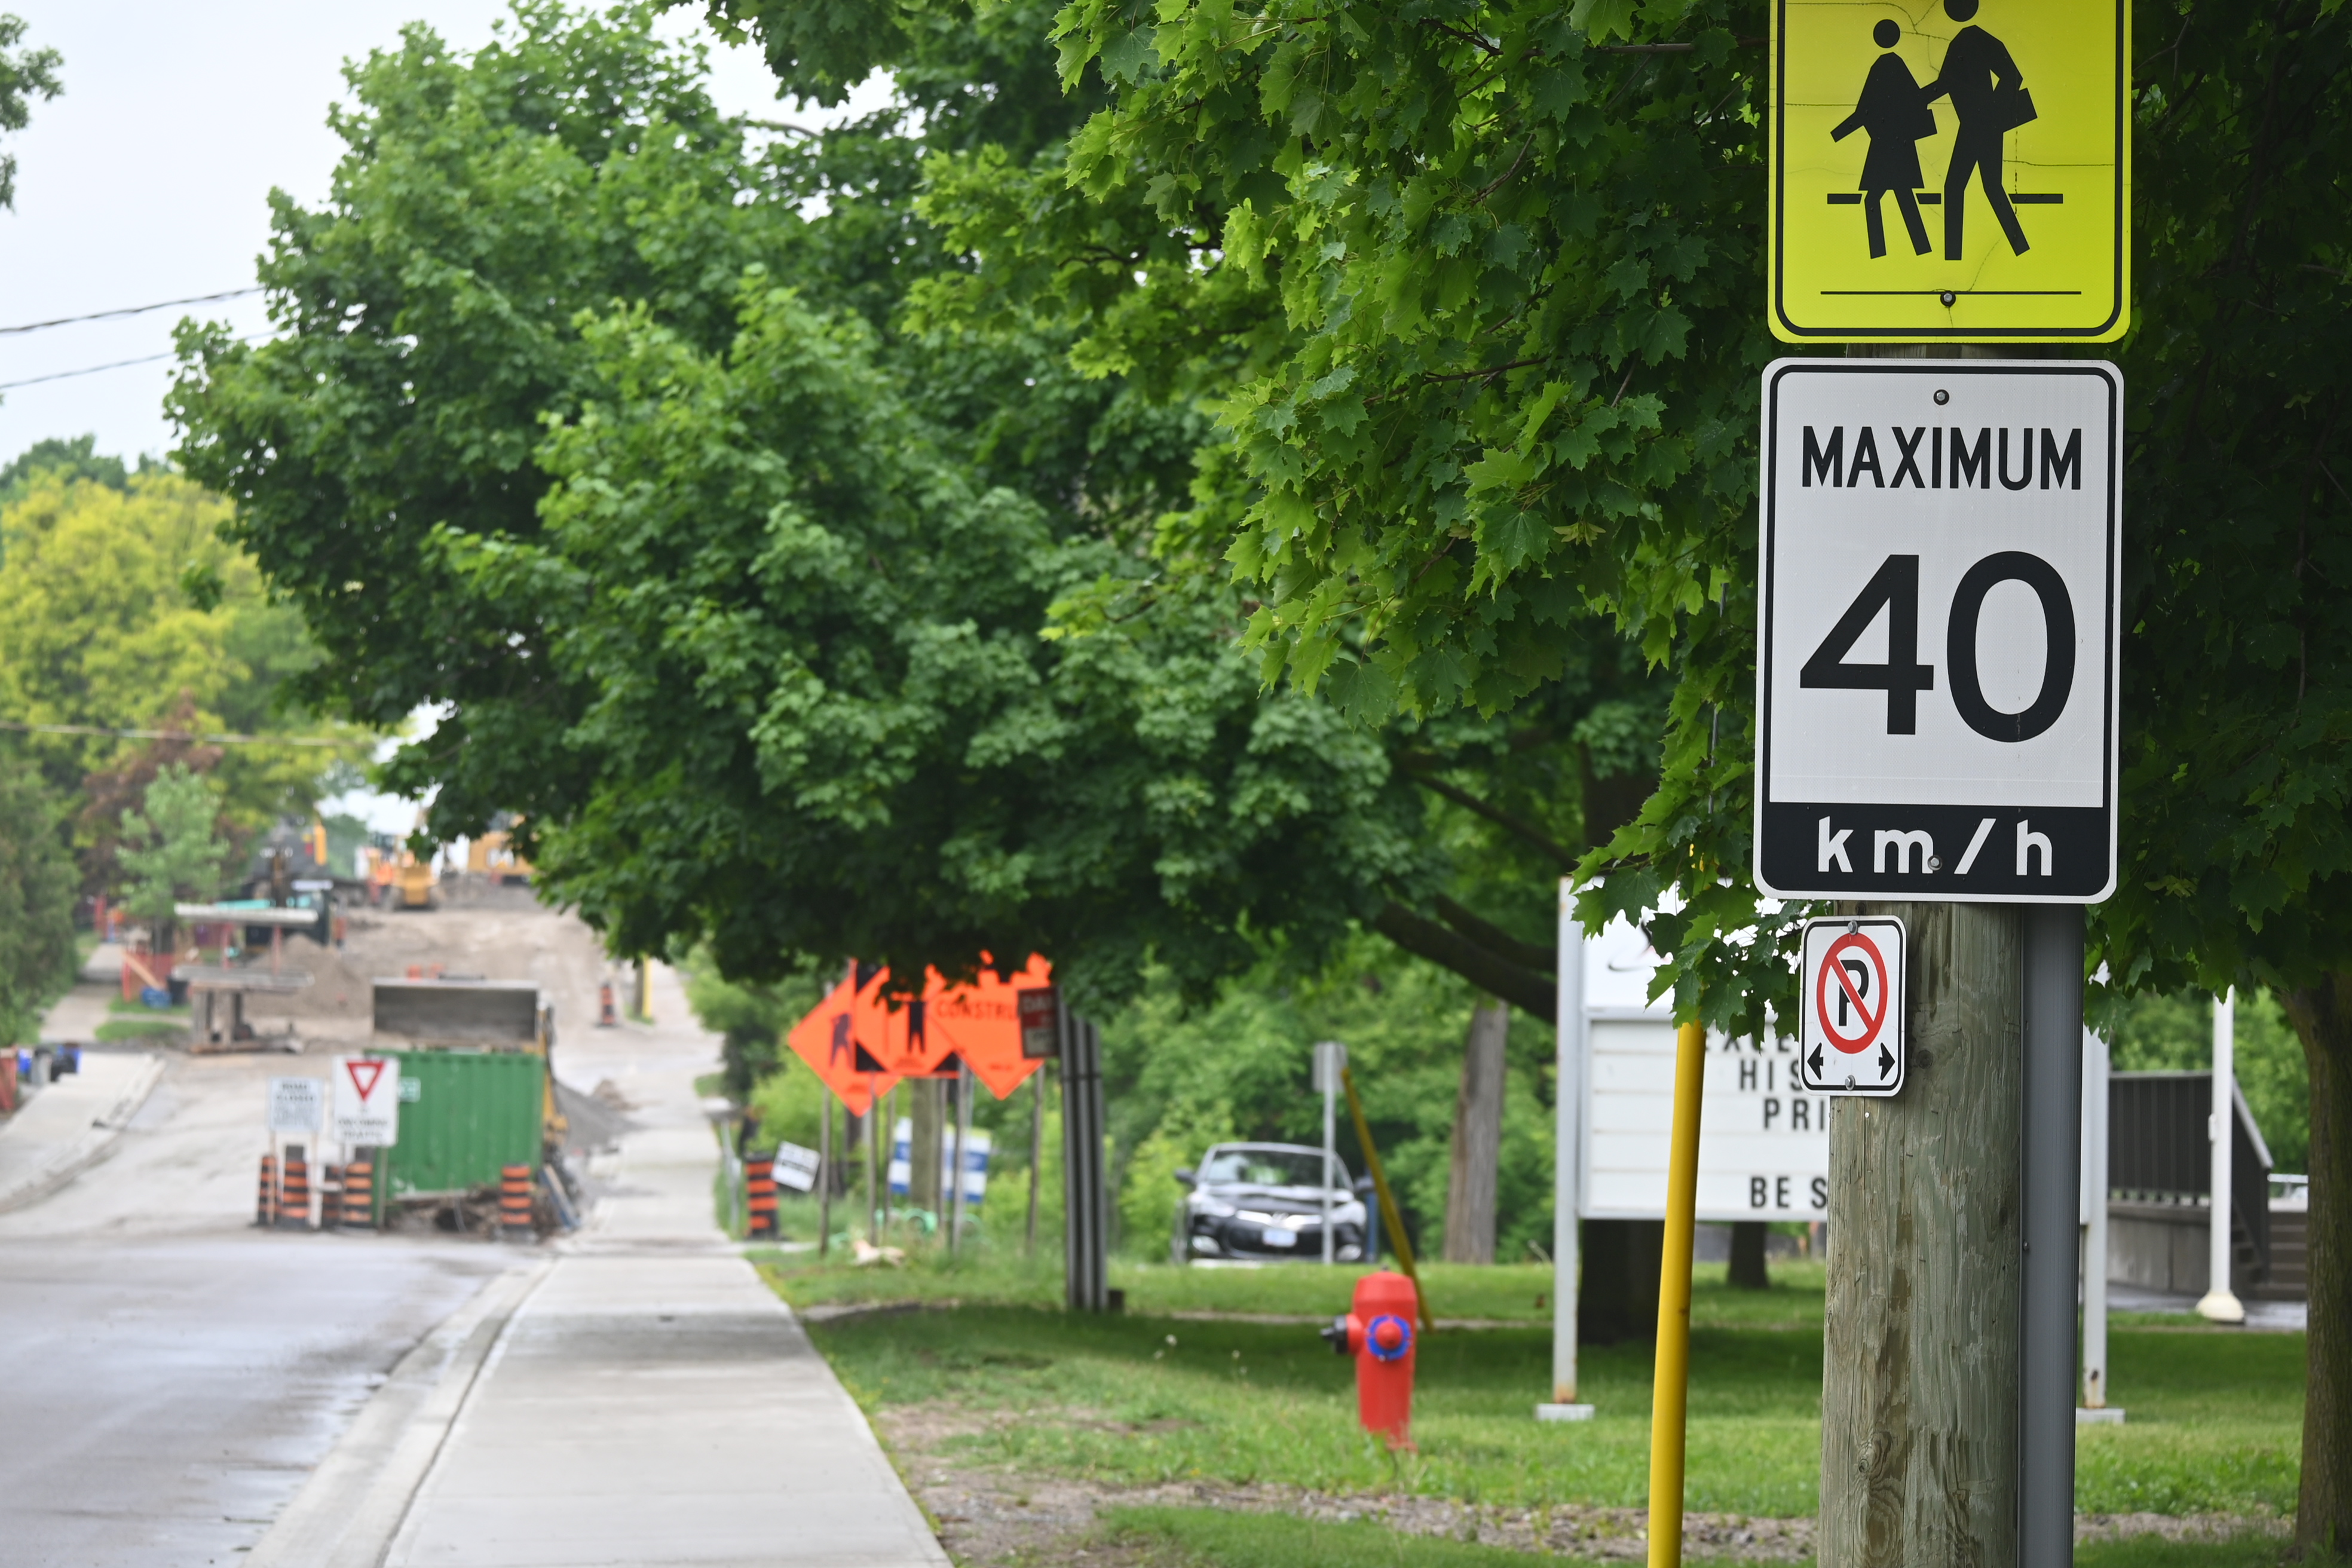 Will new speed limits of 30 km/h tackle Newmarket speeding woes